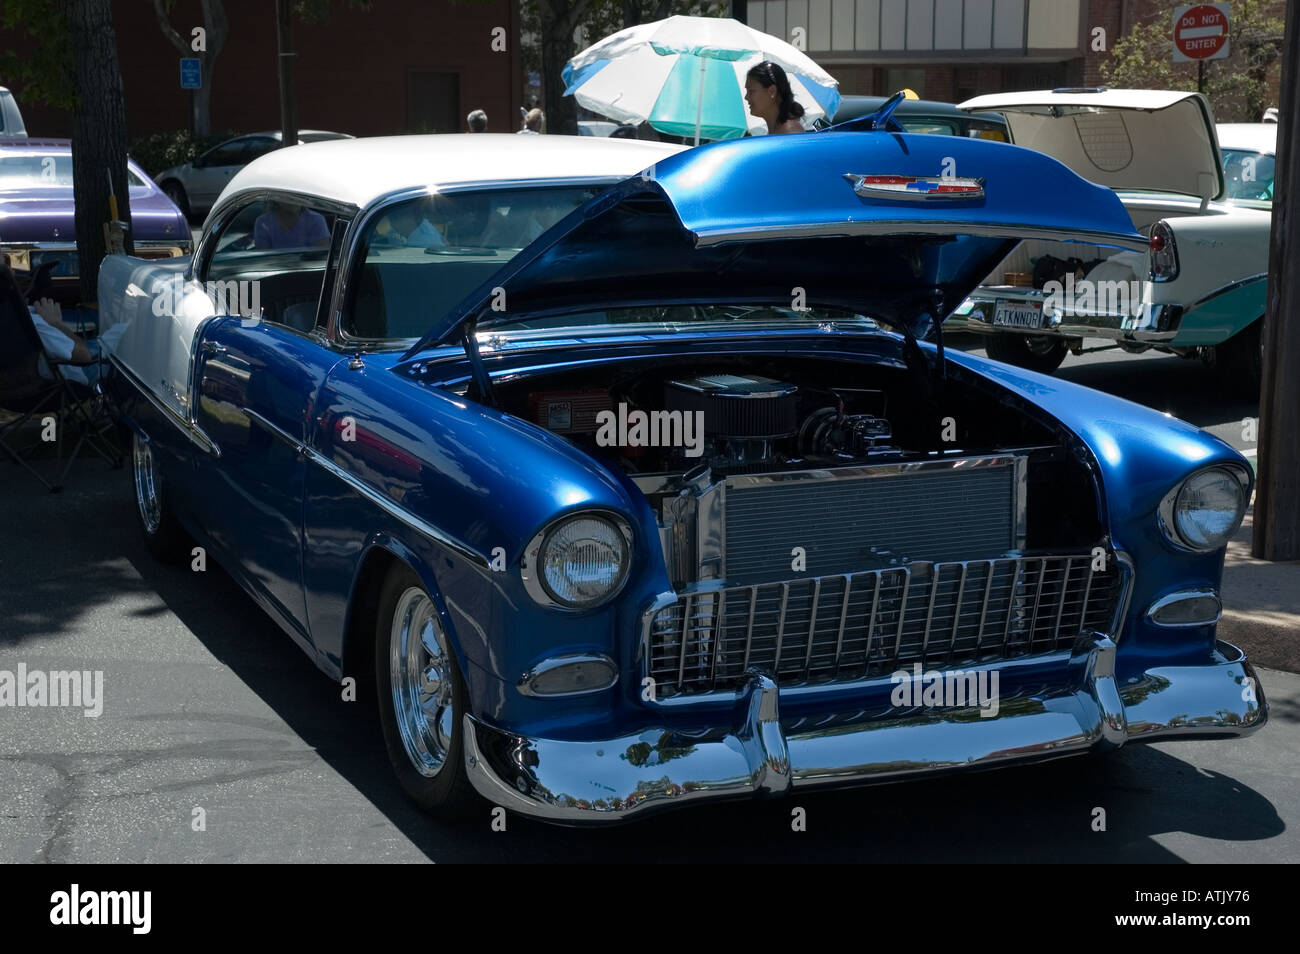 Los Angeles California car show antique customized Chevy Chevrolet Bel Air 57 1957 blue and white Stock Photo